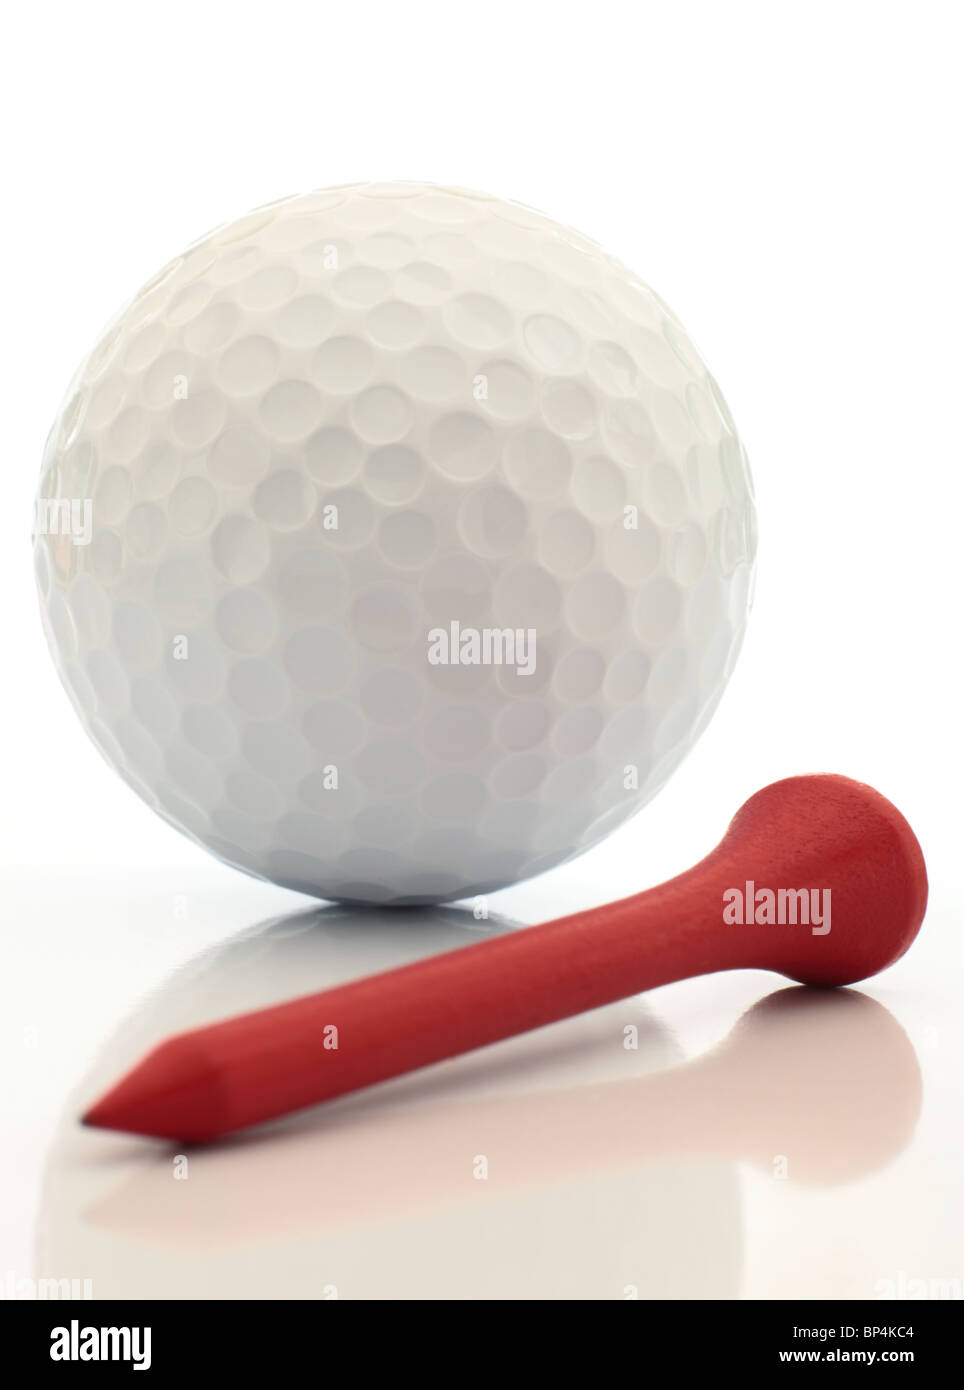 A golf ball and red tee close up reflected. This image is exclusive to Alamy. Stock Photo